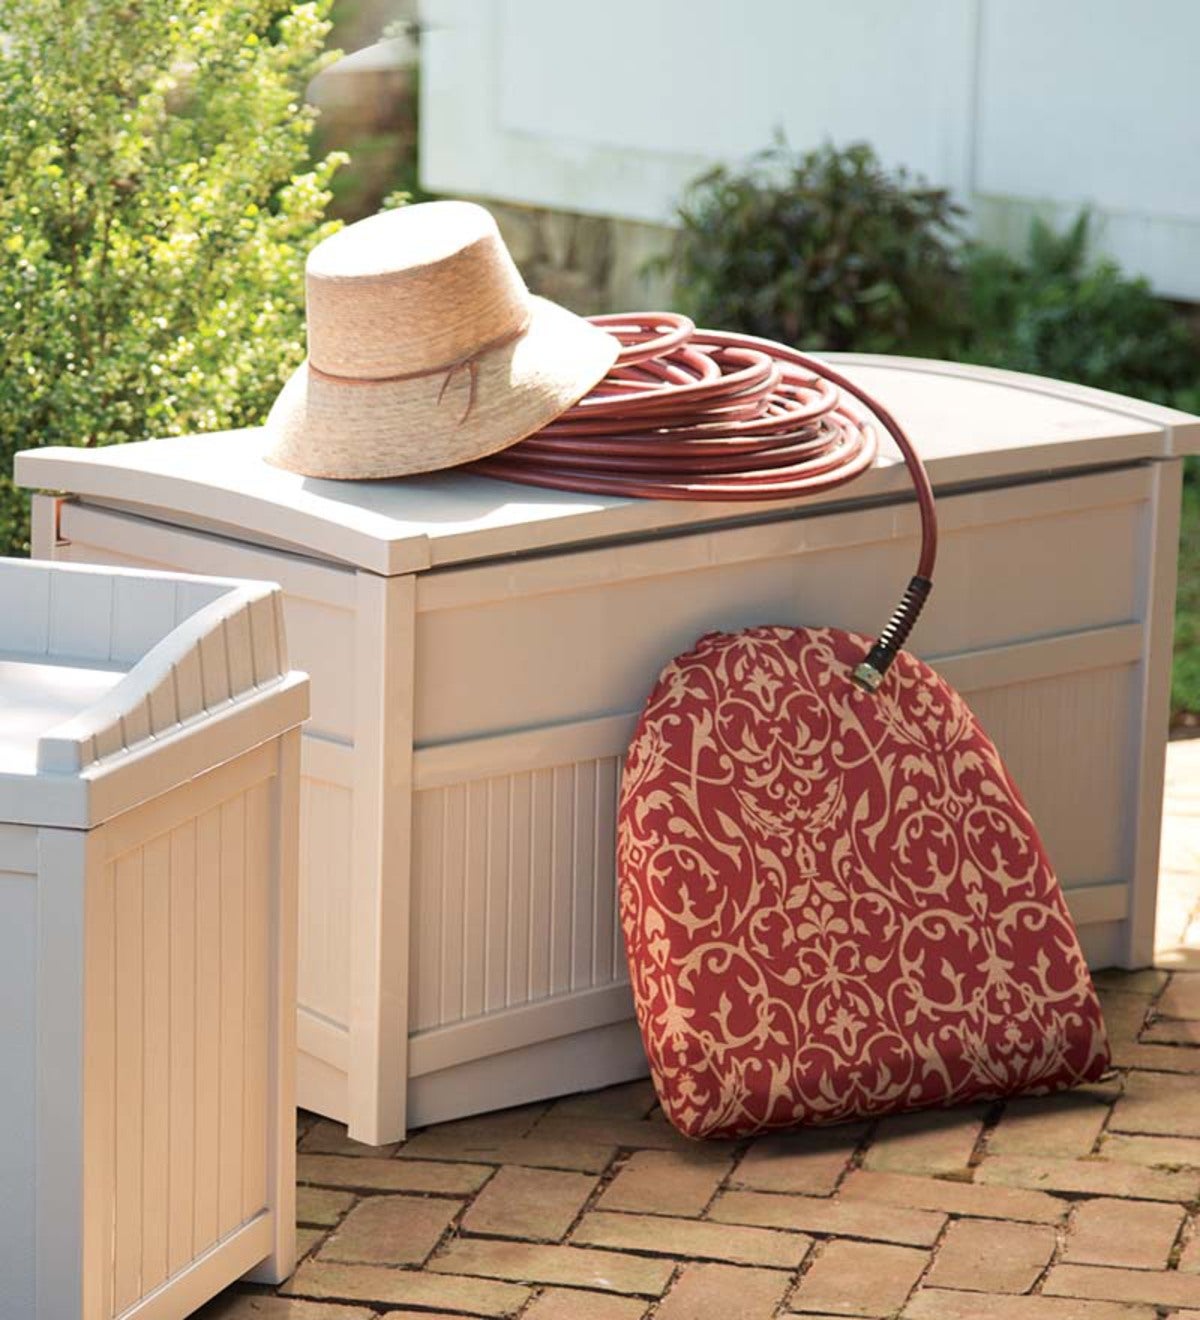 Weather-Resistant Maintenance-Free Resin Storage Boxes With Stay-Dry Lids